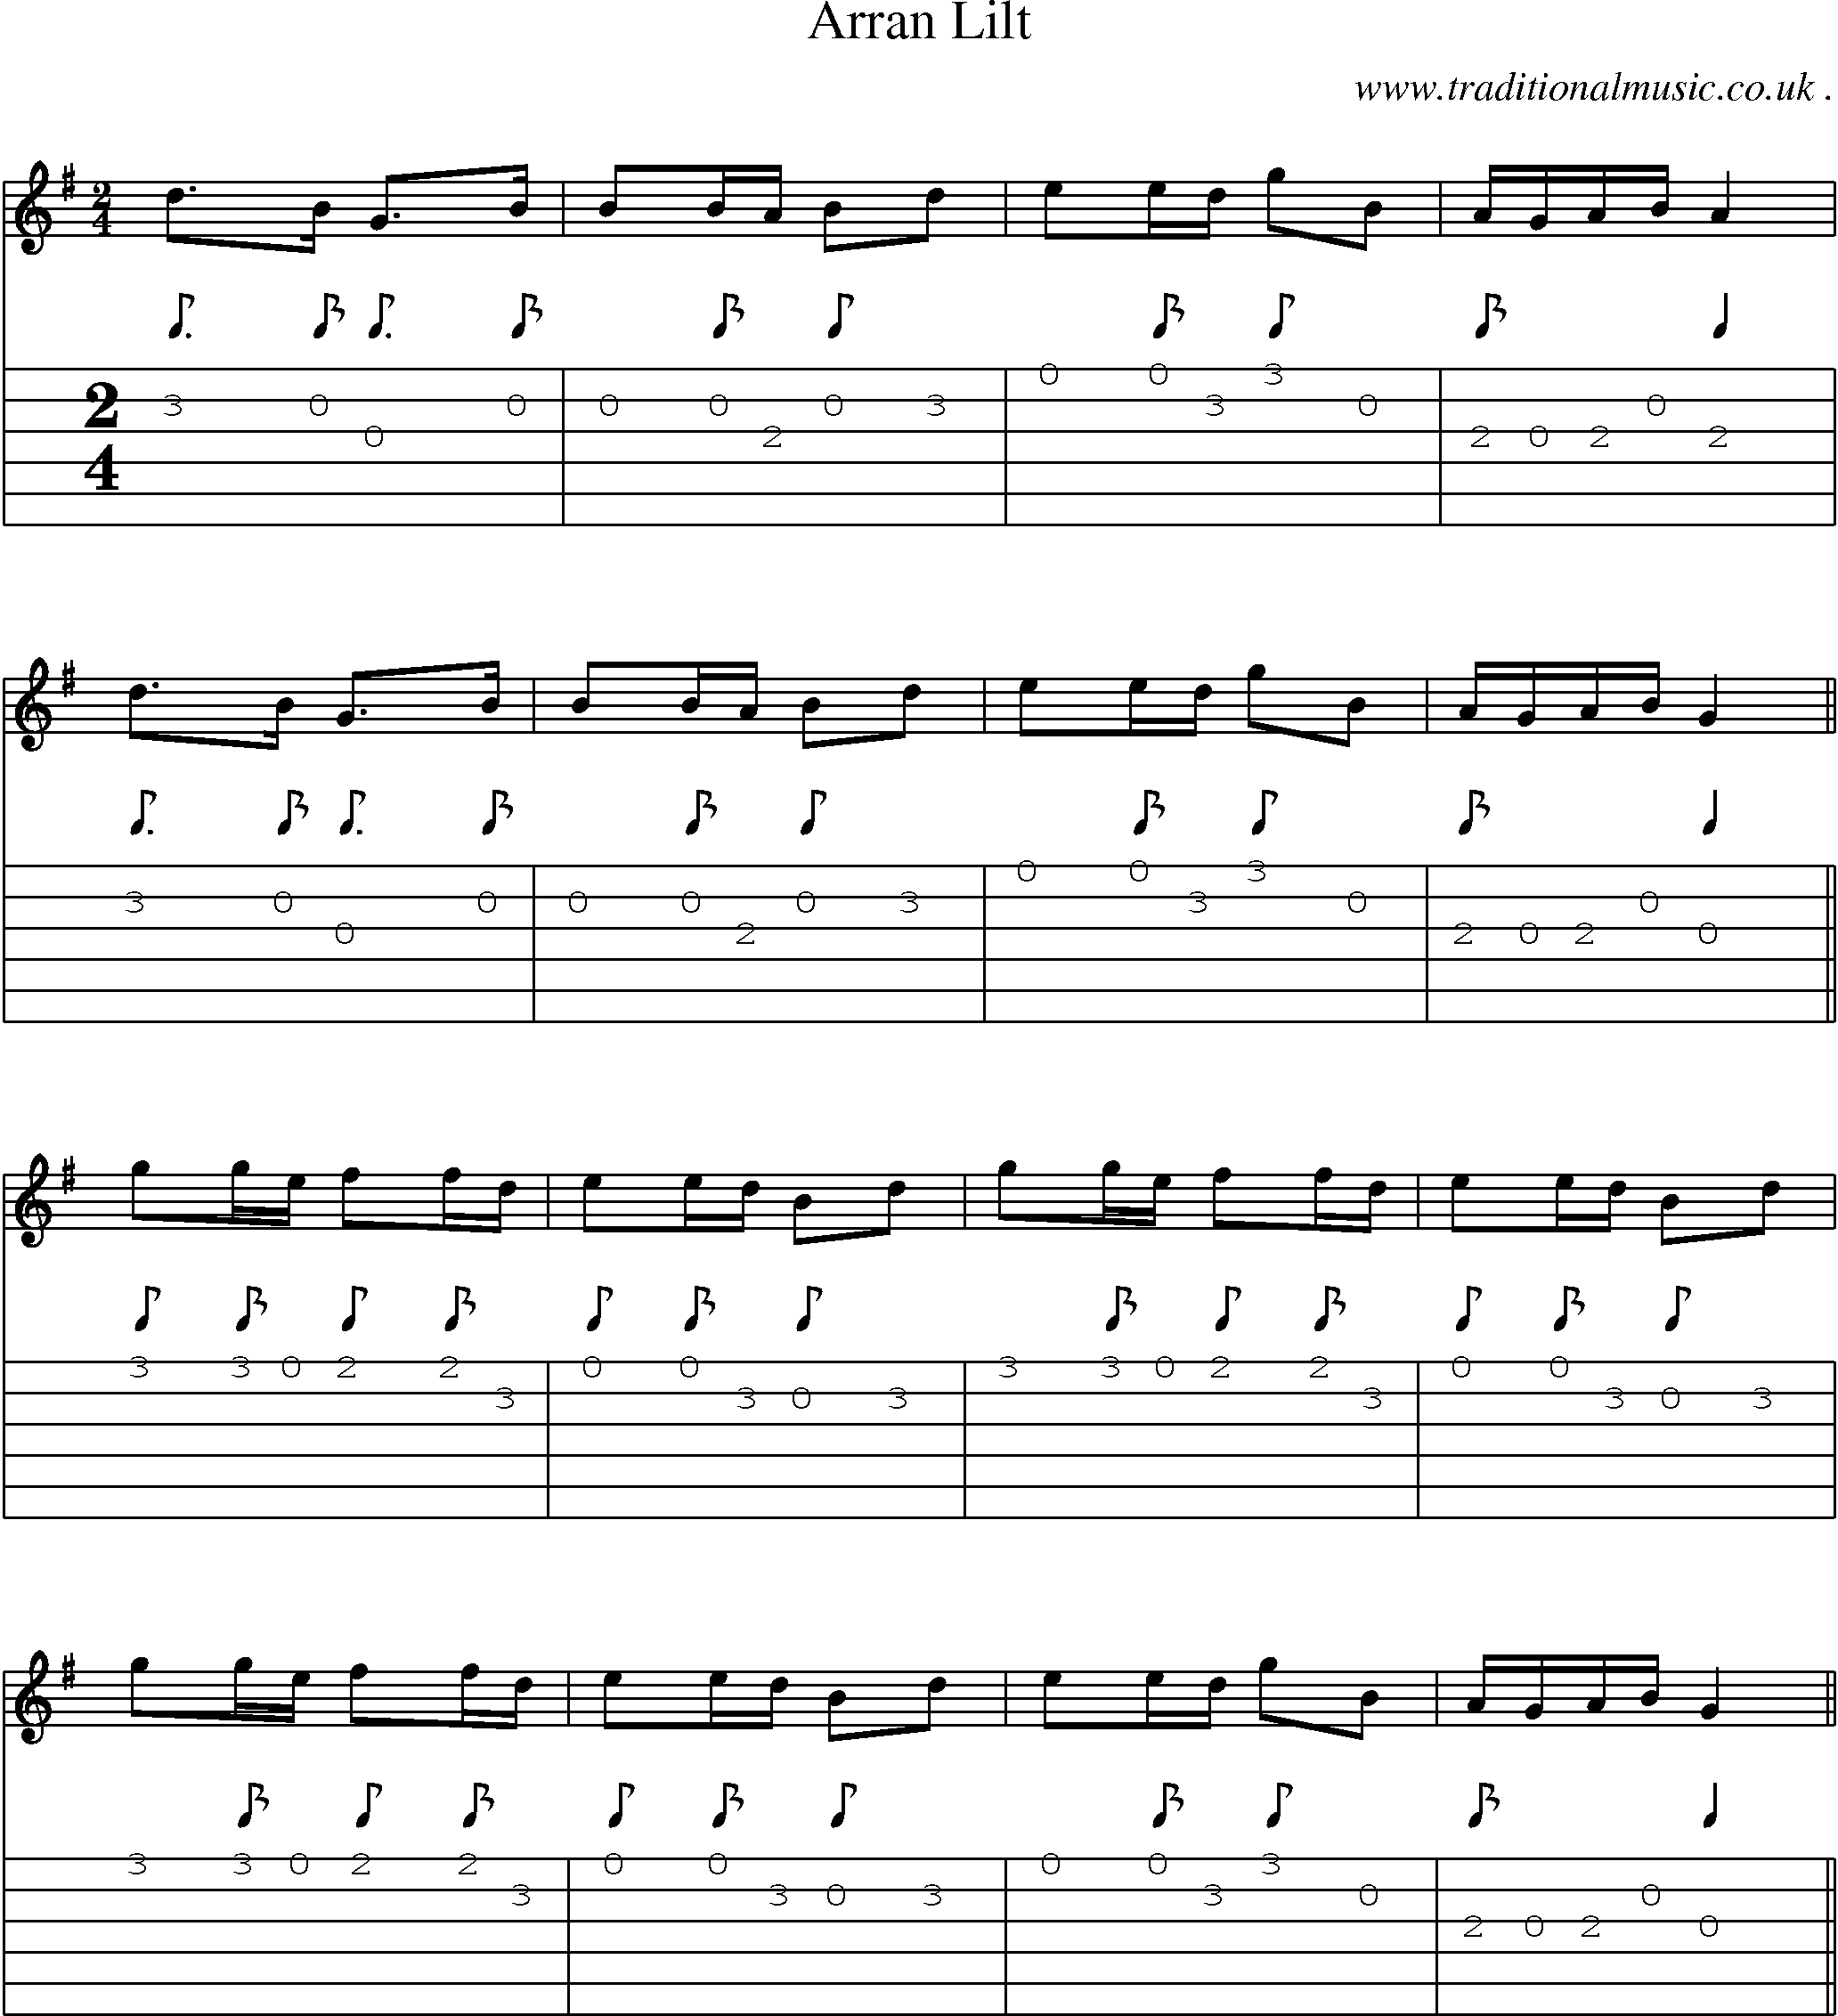 Sheet-music  score, Chords and Guitar Tabs for Arran Lilt